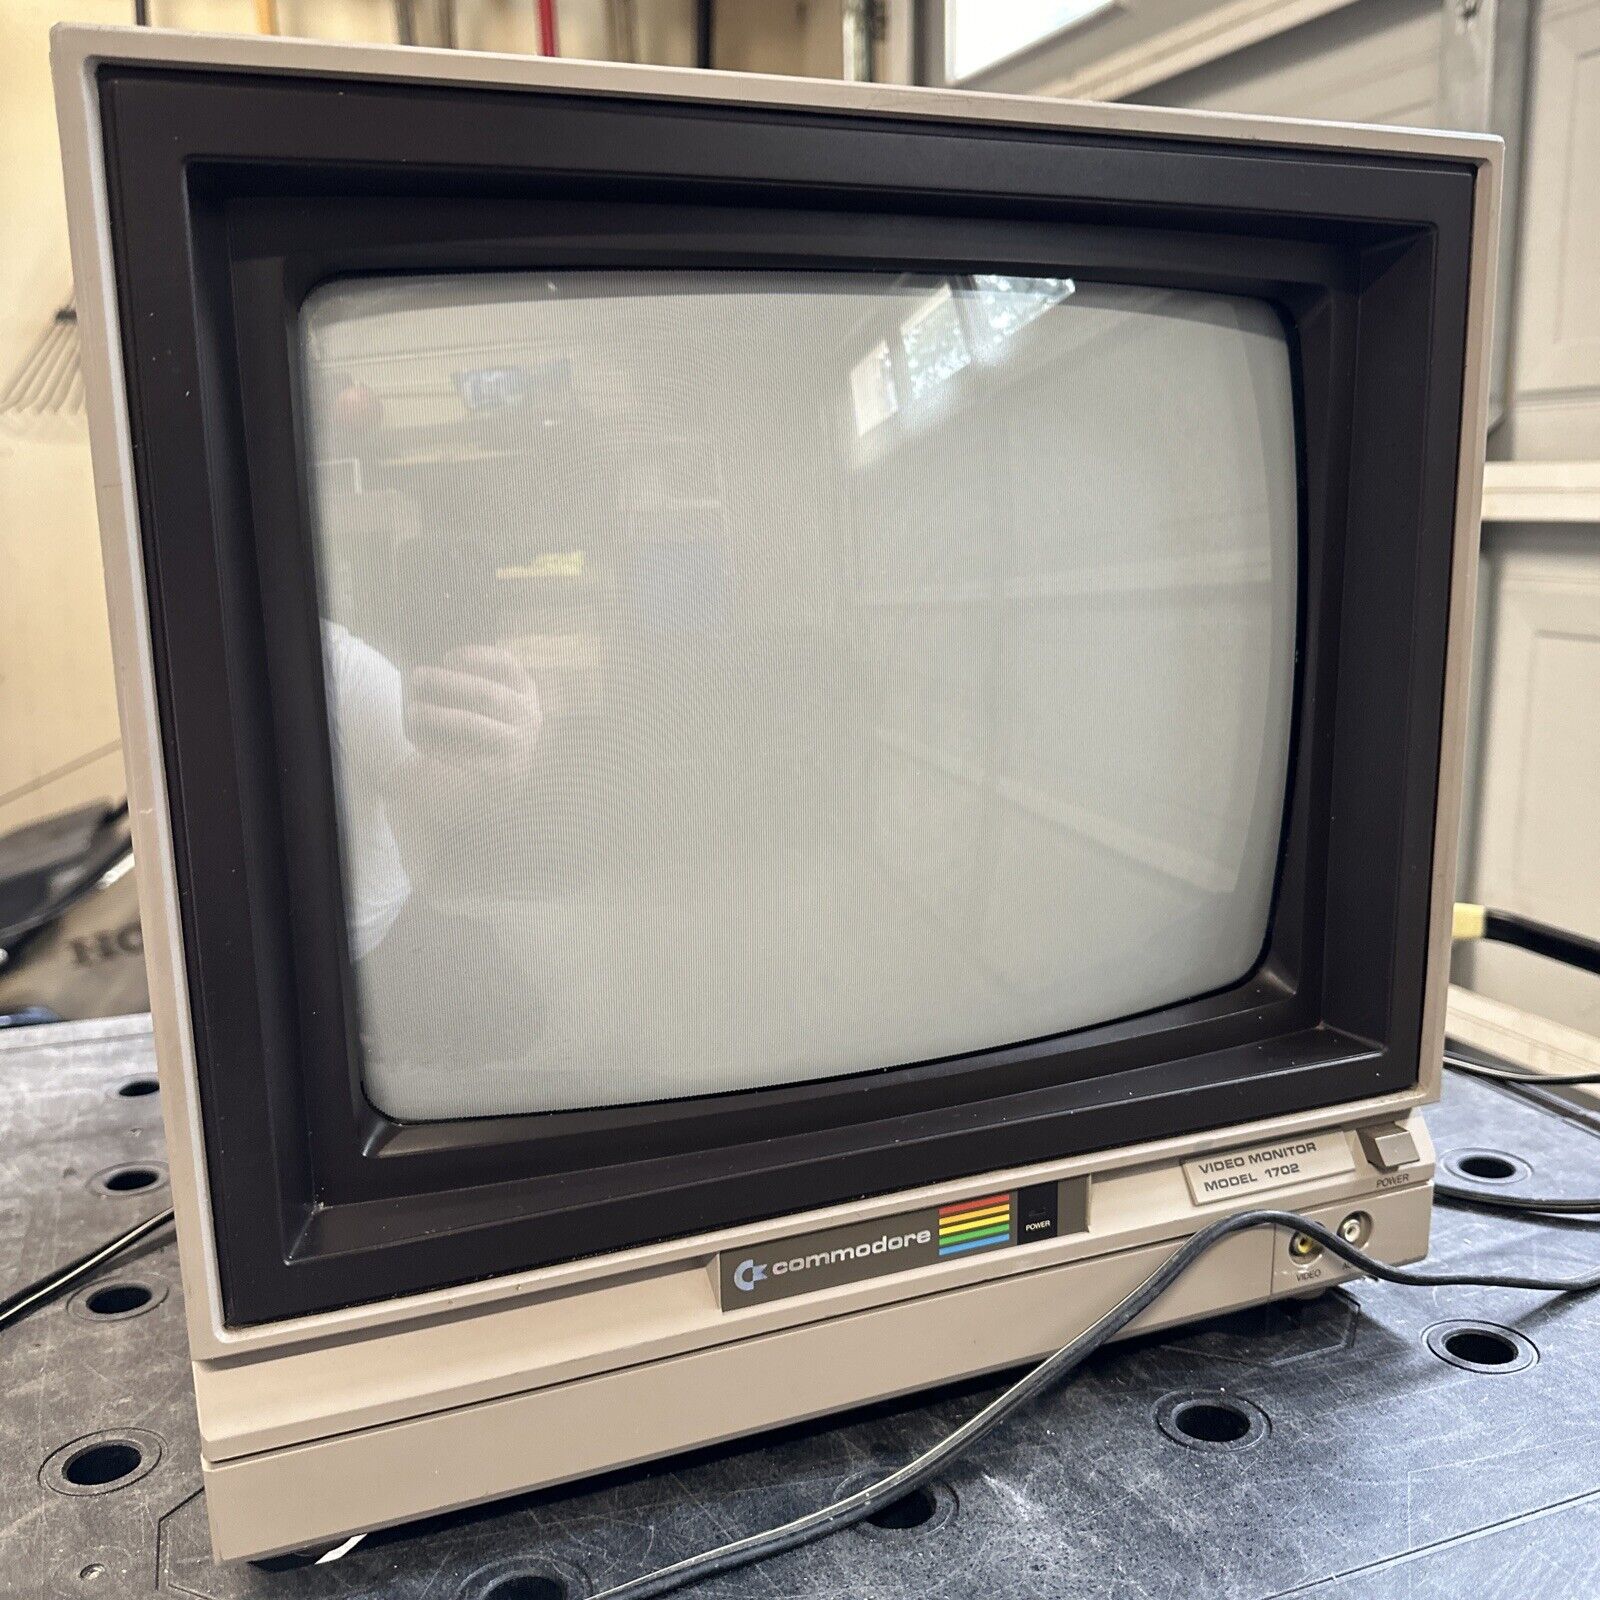 Commodore 1702 CRT Monitor Built-in Speakers Clear Picture Tested & Working